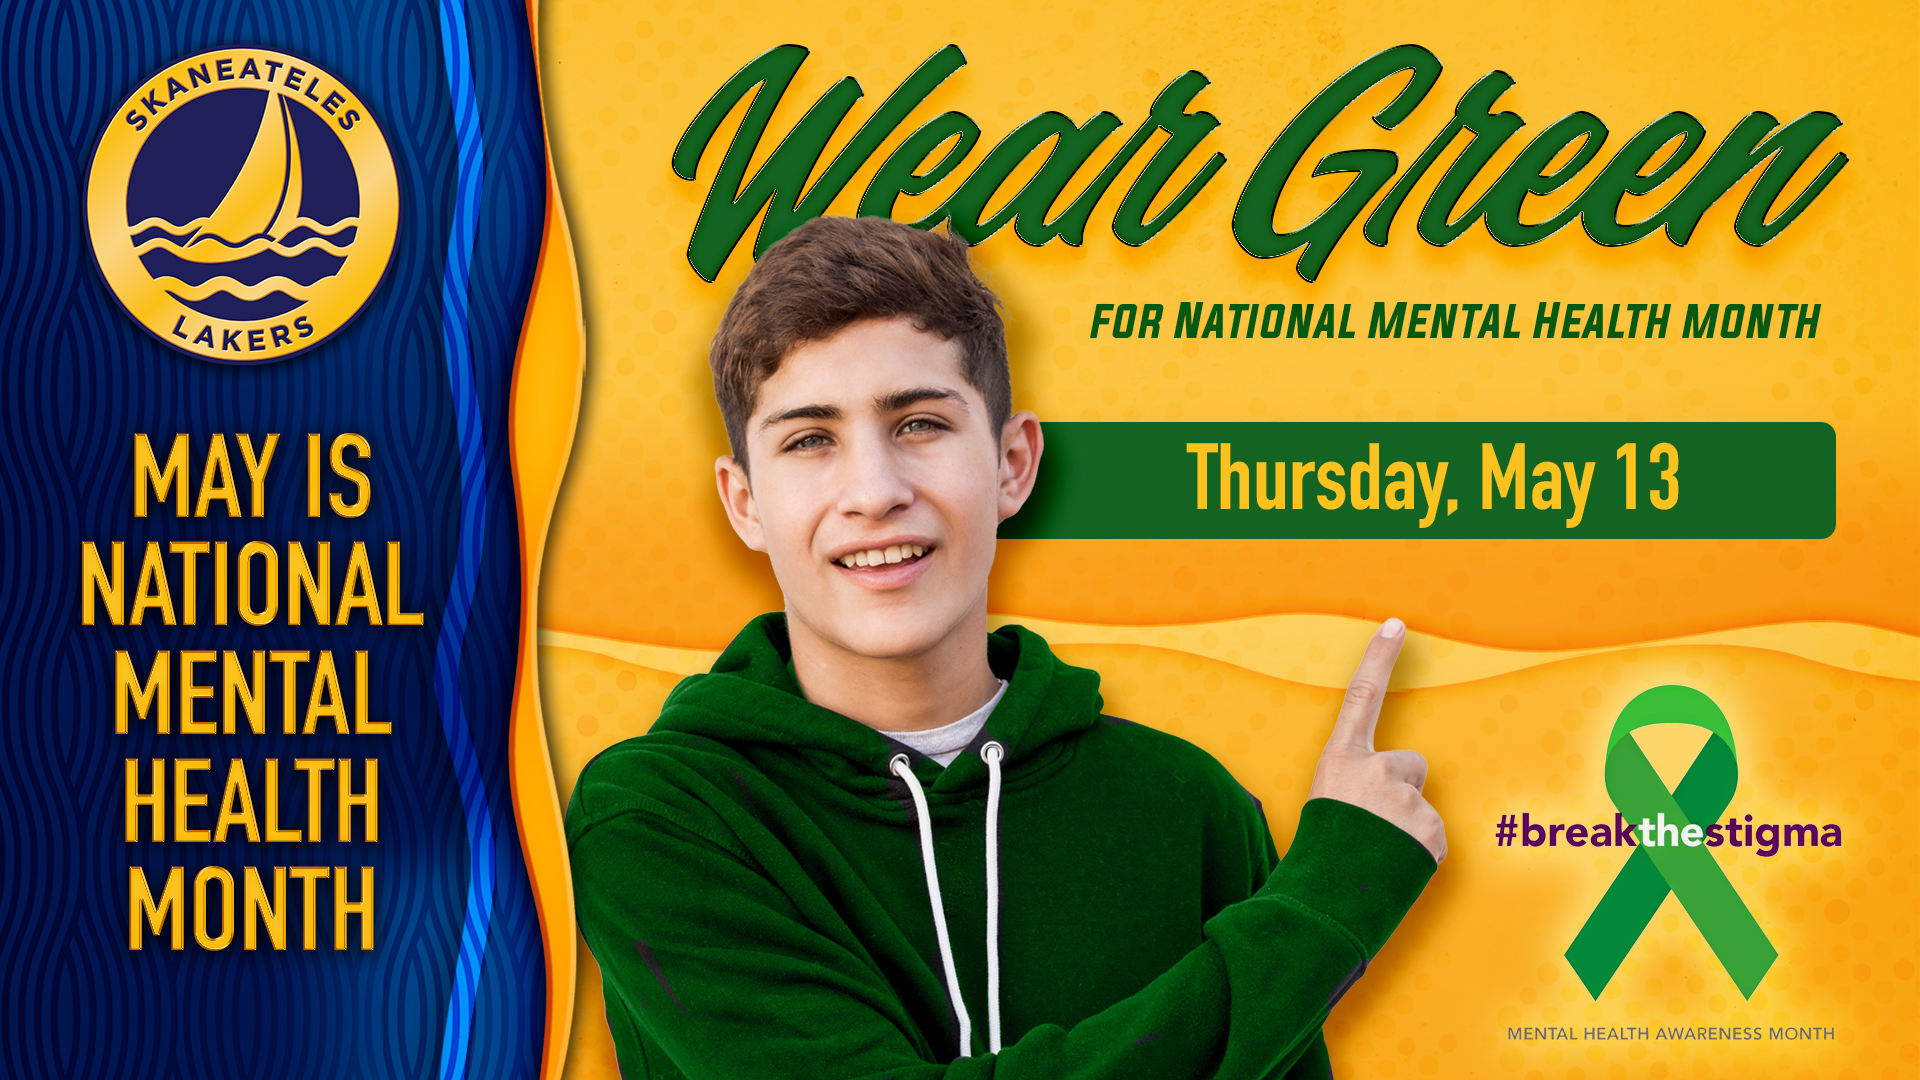 Wear Green on Thursday, May 13 for National Health Month